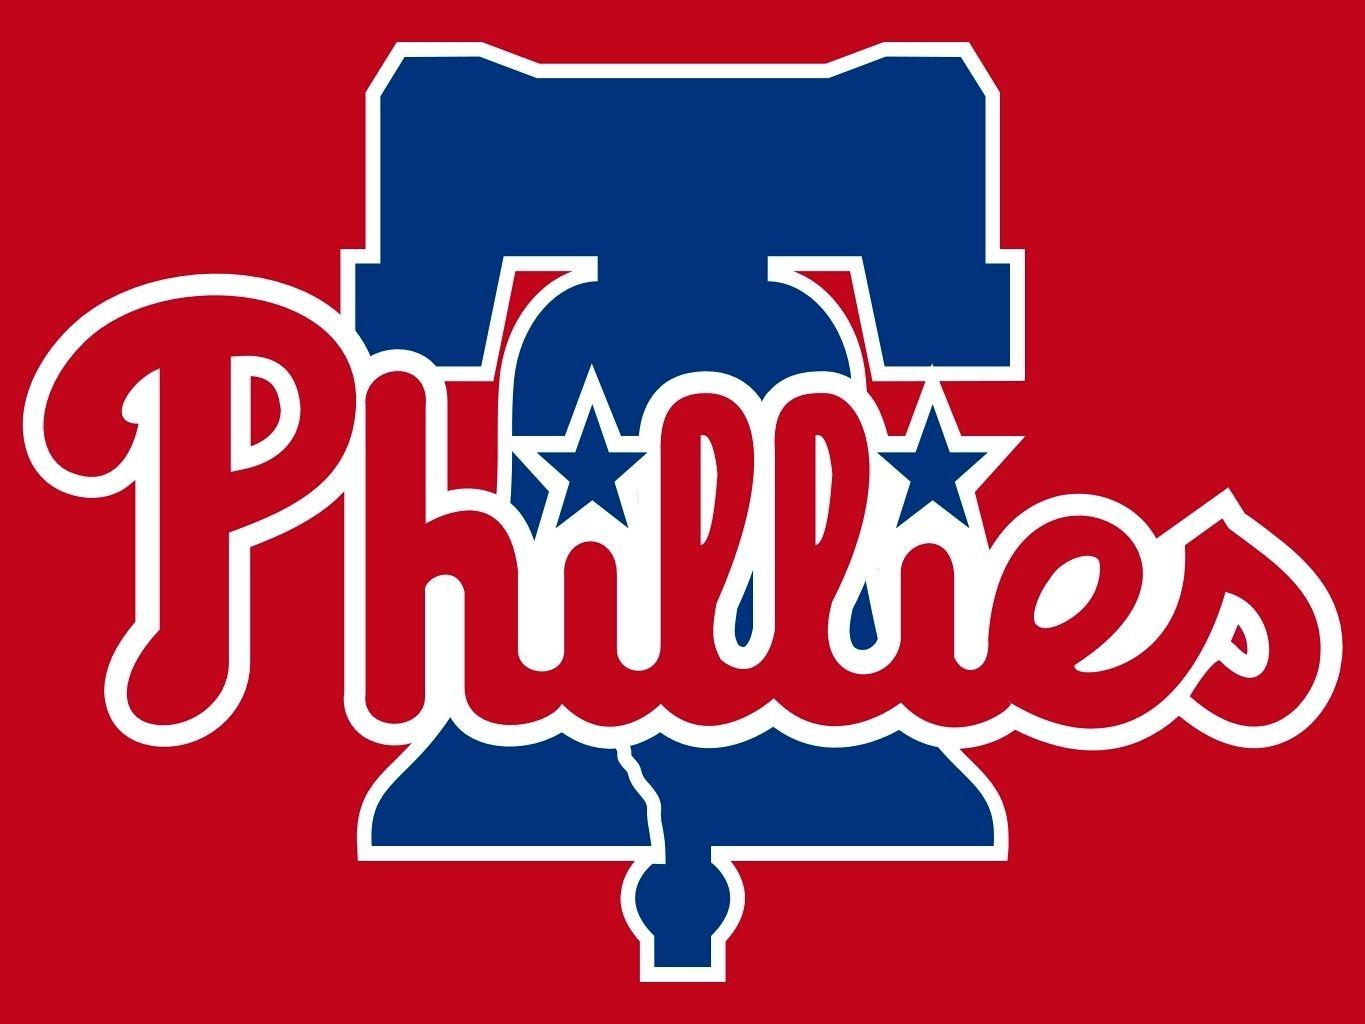 Philadelphia Phillies Team Logo - The Phillies Are Off To Their Worst 49 Game Start Since 2002